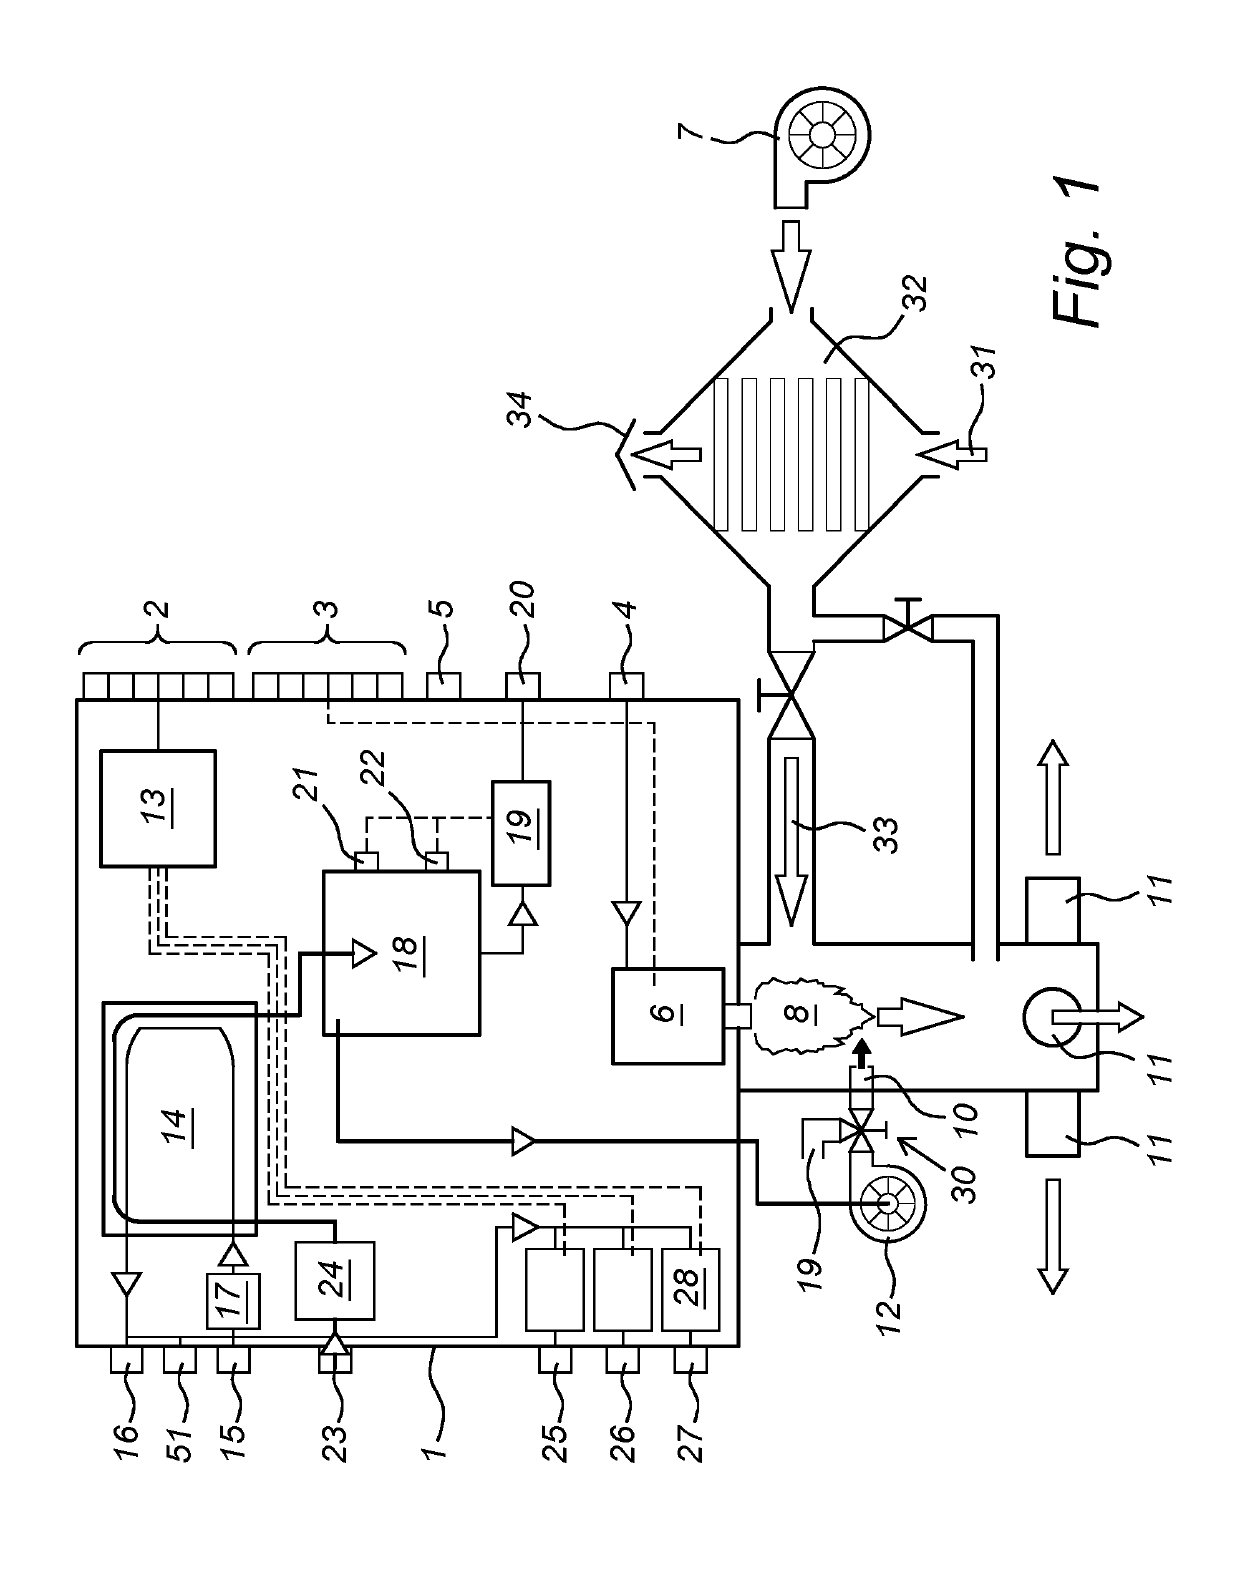 Device, system and process for treating porous materials